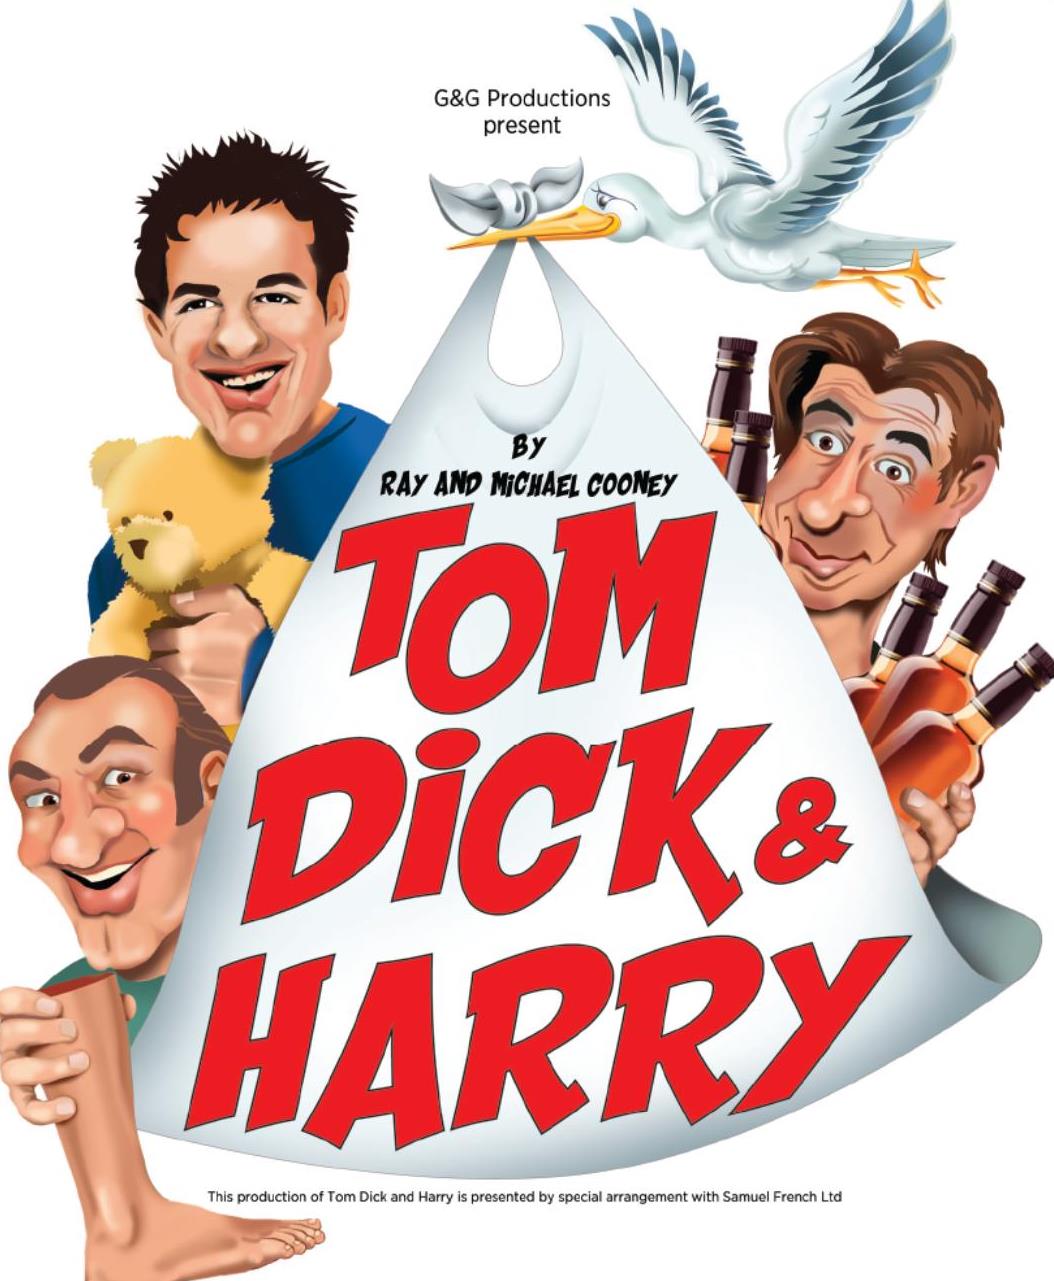 Who played in tom dick and harry